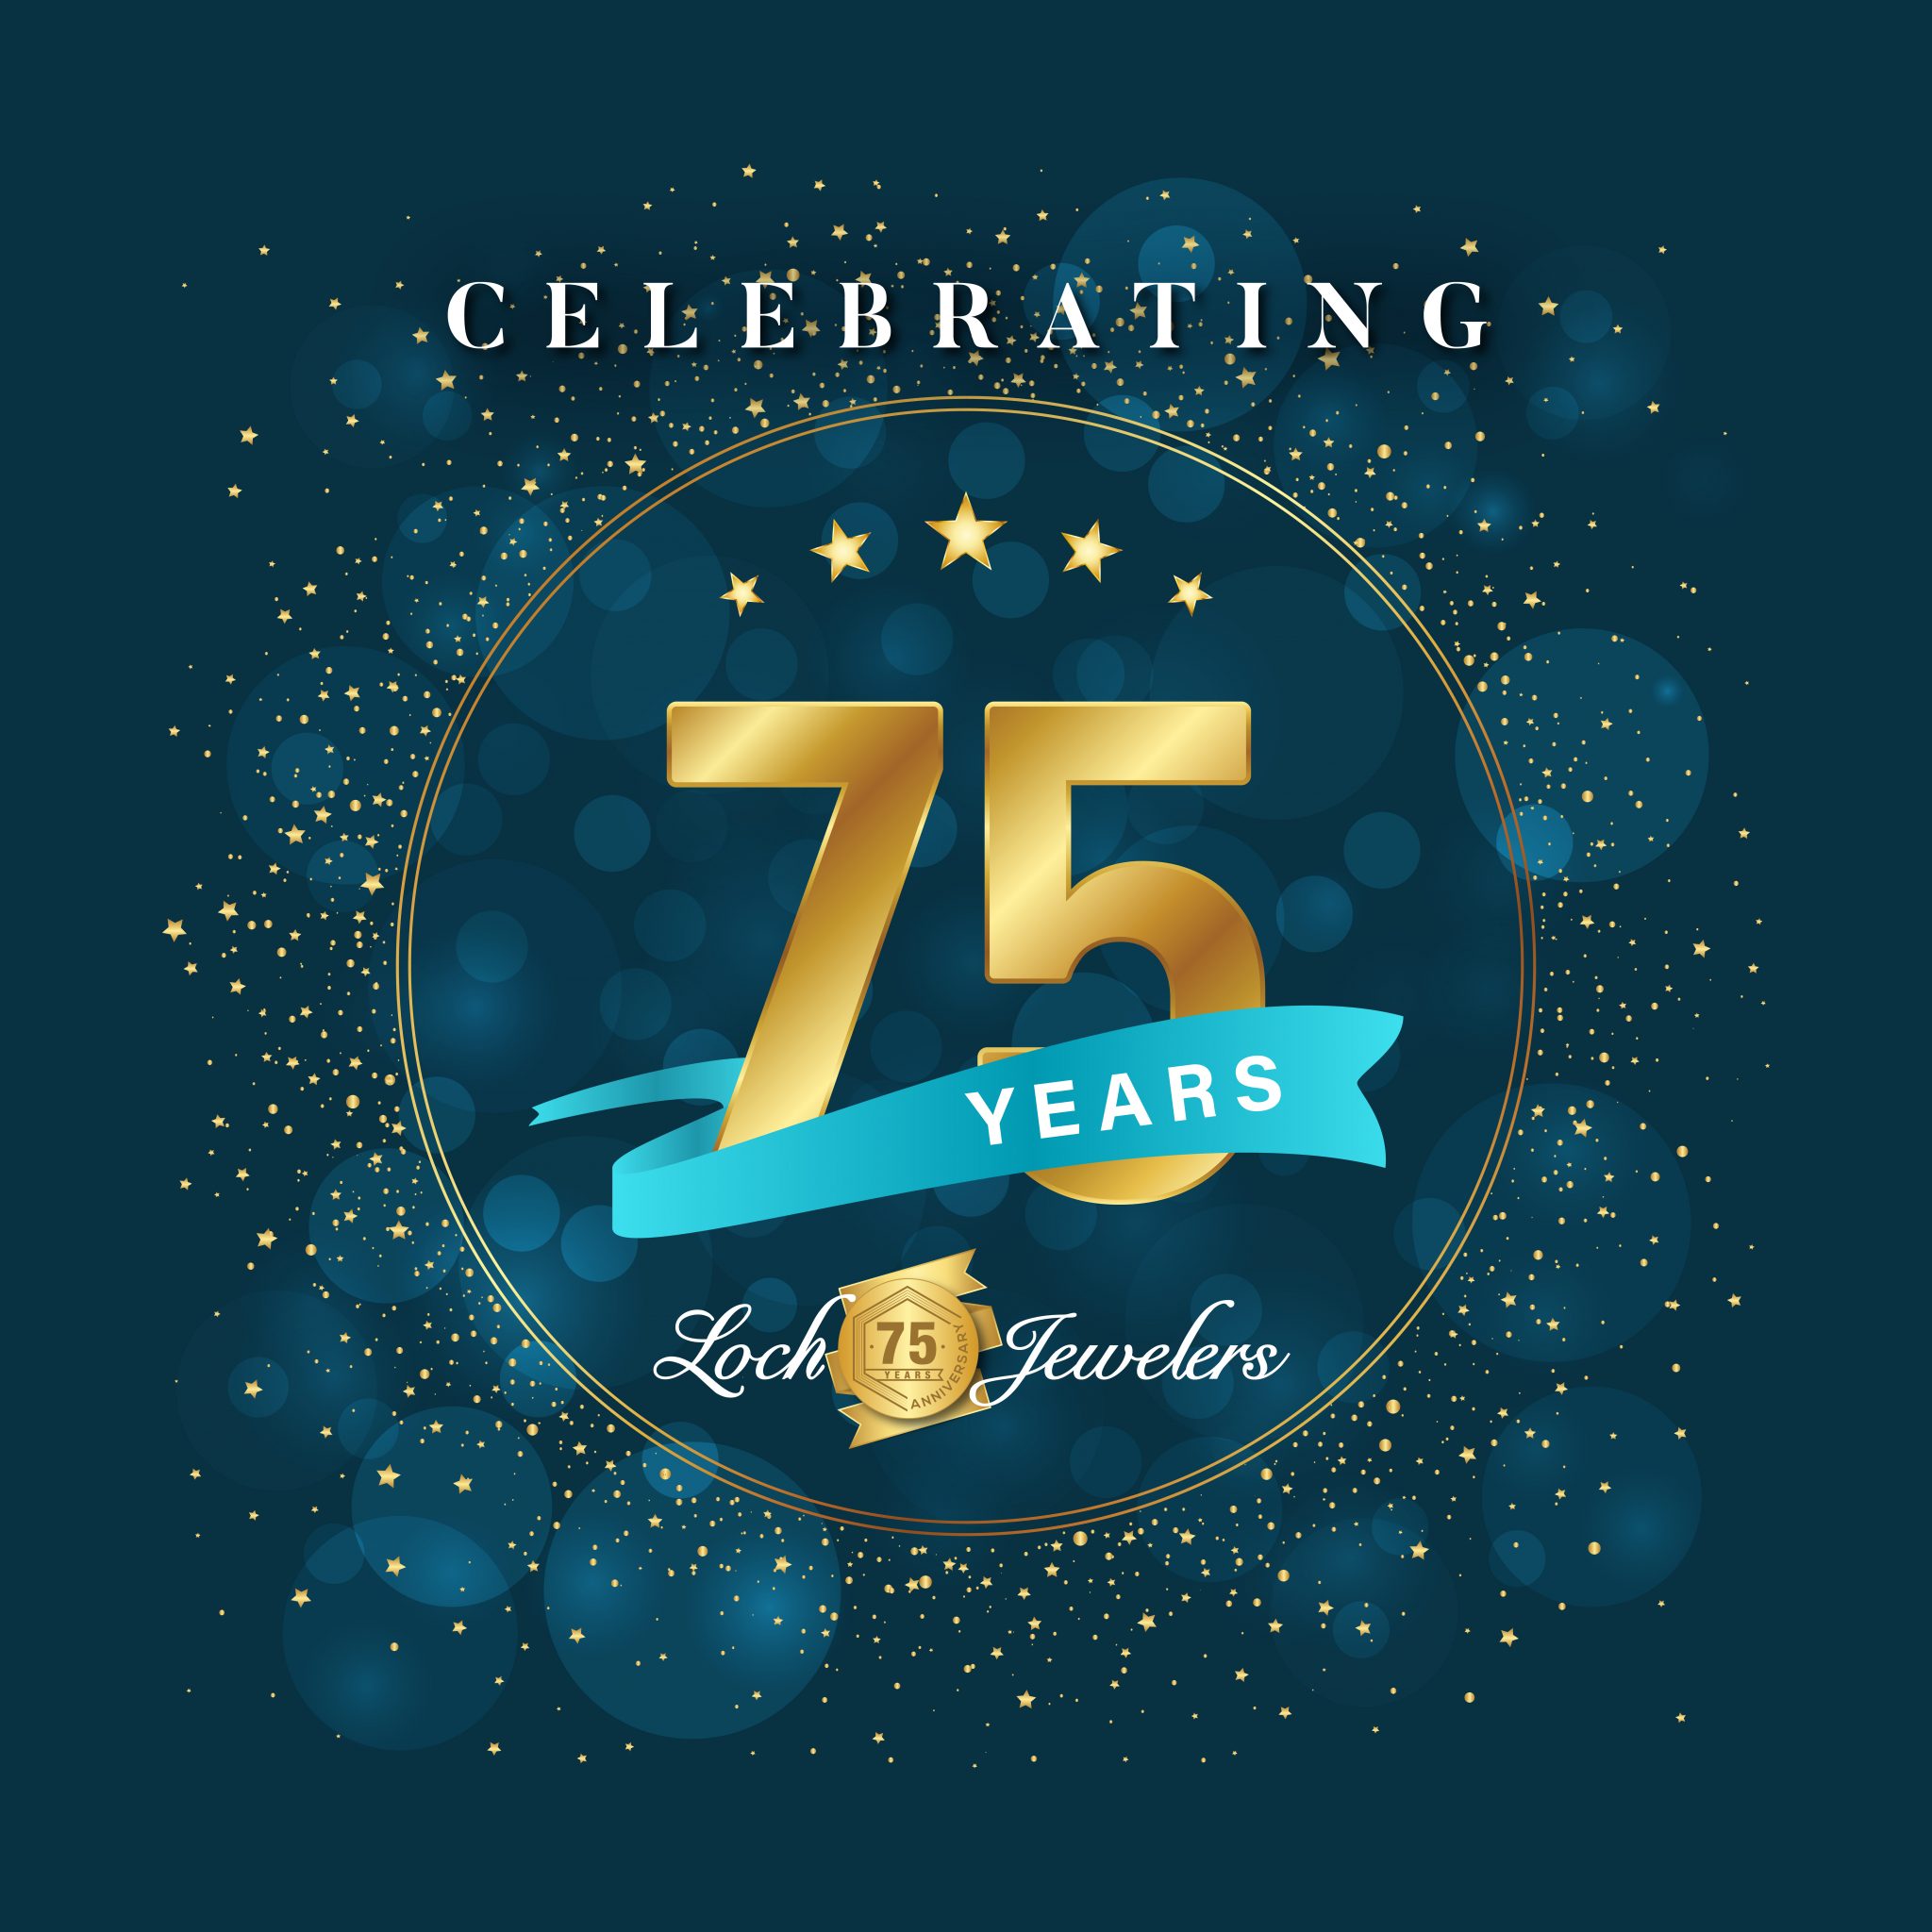 Celebrating 75 years of serving the community!